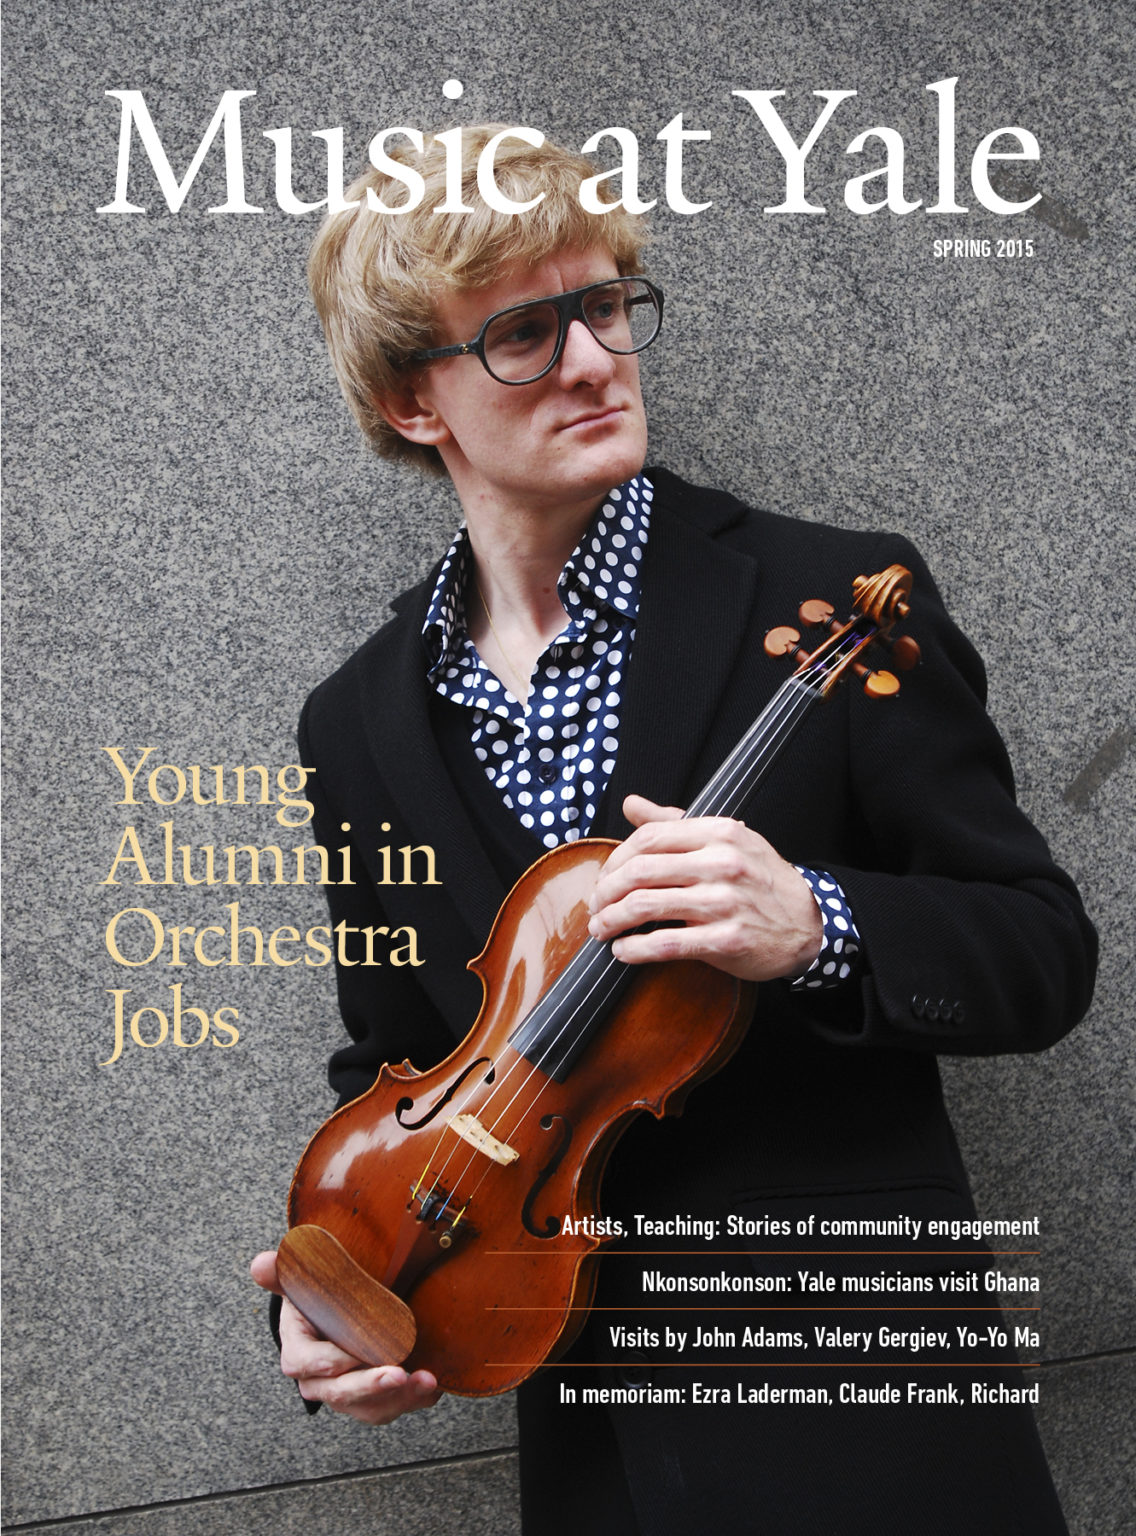 Music at Yale Magazine 2015 Cover by Paul Kazmercyk Granite Bay Graphic Design